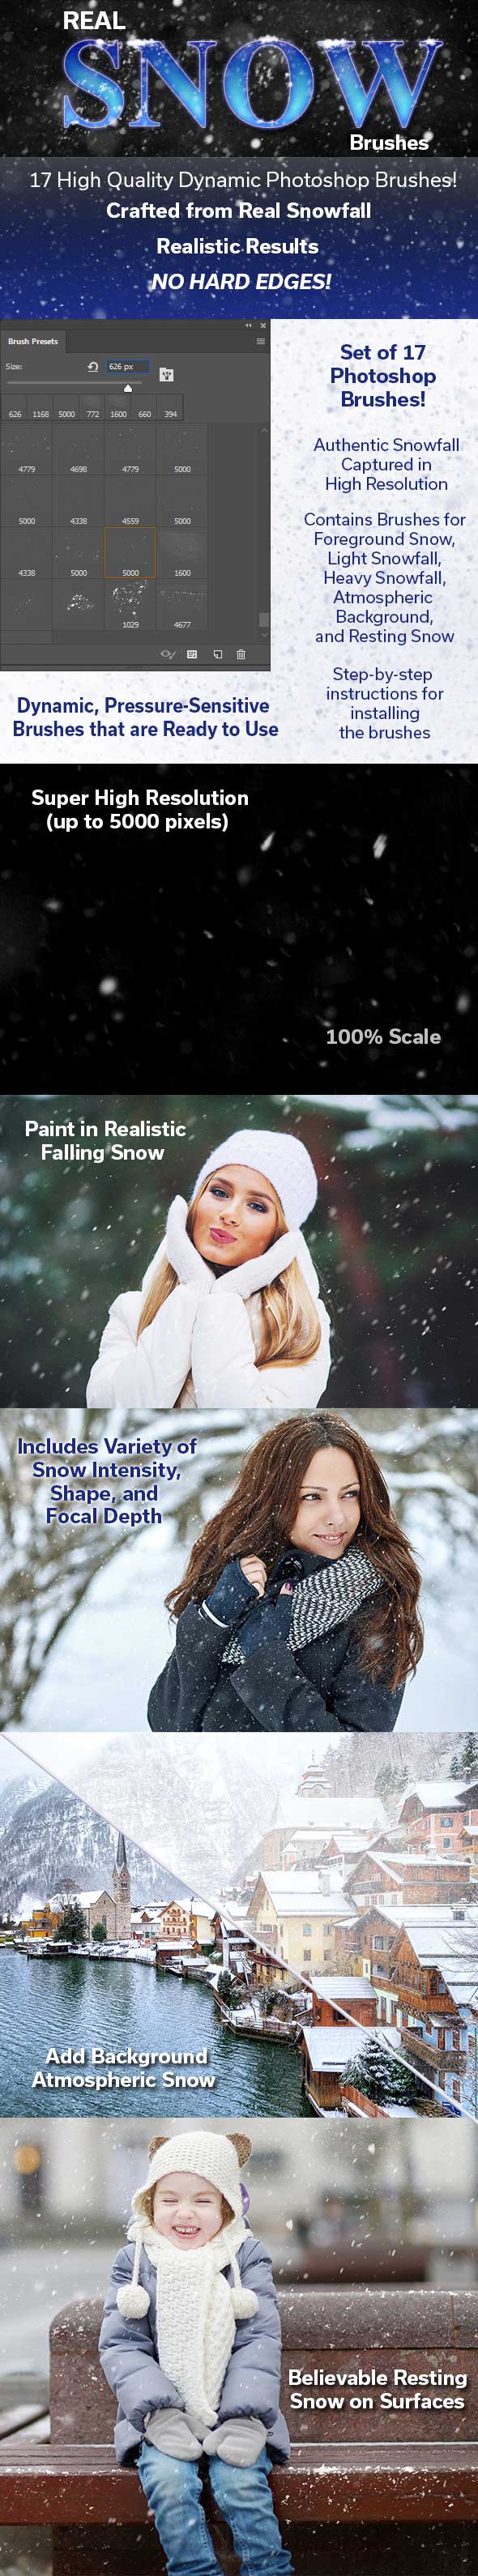 Real Snow Photoshop Brushes